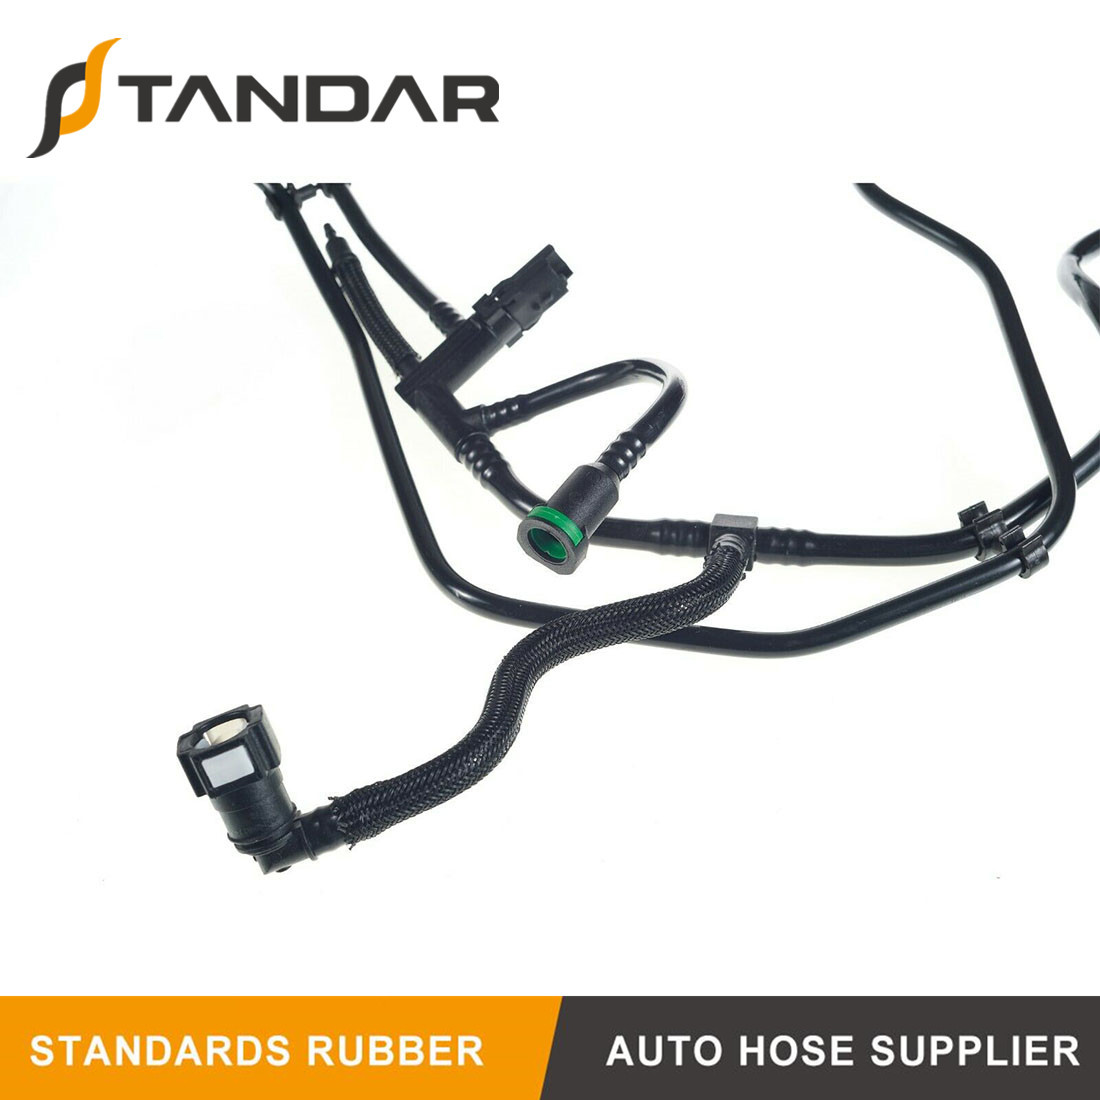 7V2Q9D350CC Fuel Hose Pipe Set Harness For Ford Fiesta 1.4TDCI 